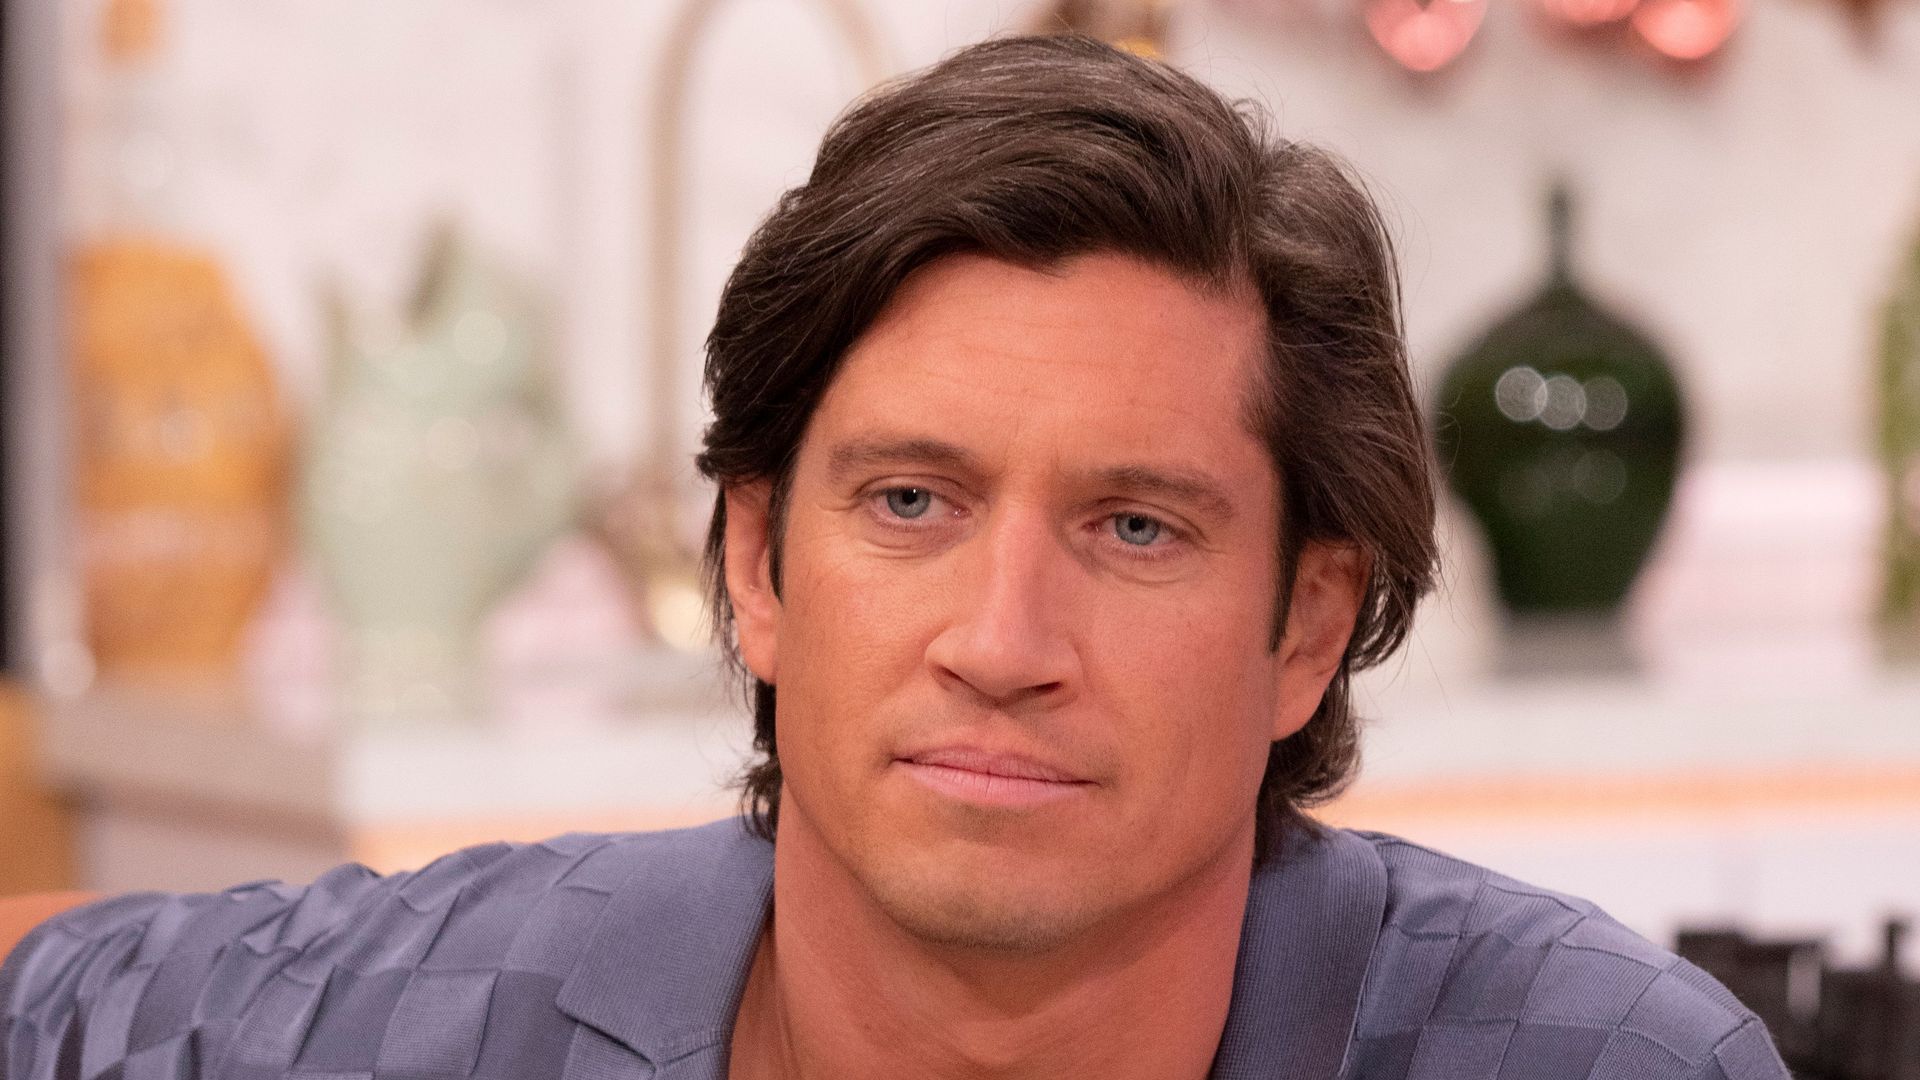 Vernon Kay with glum expression on face